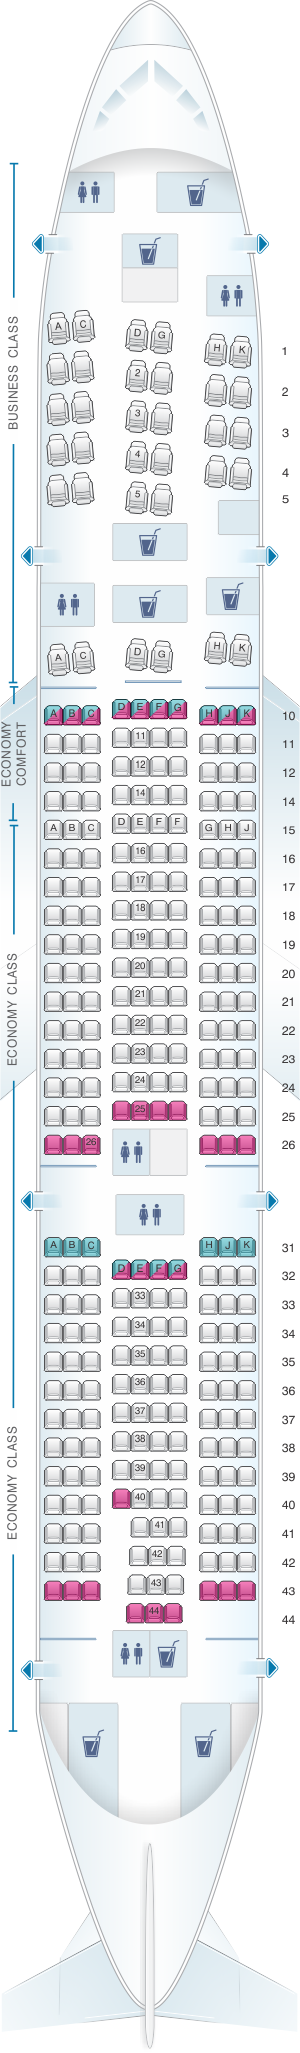 Klm Boeing 777 200 Seating Chart